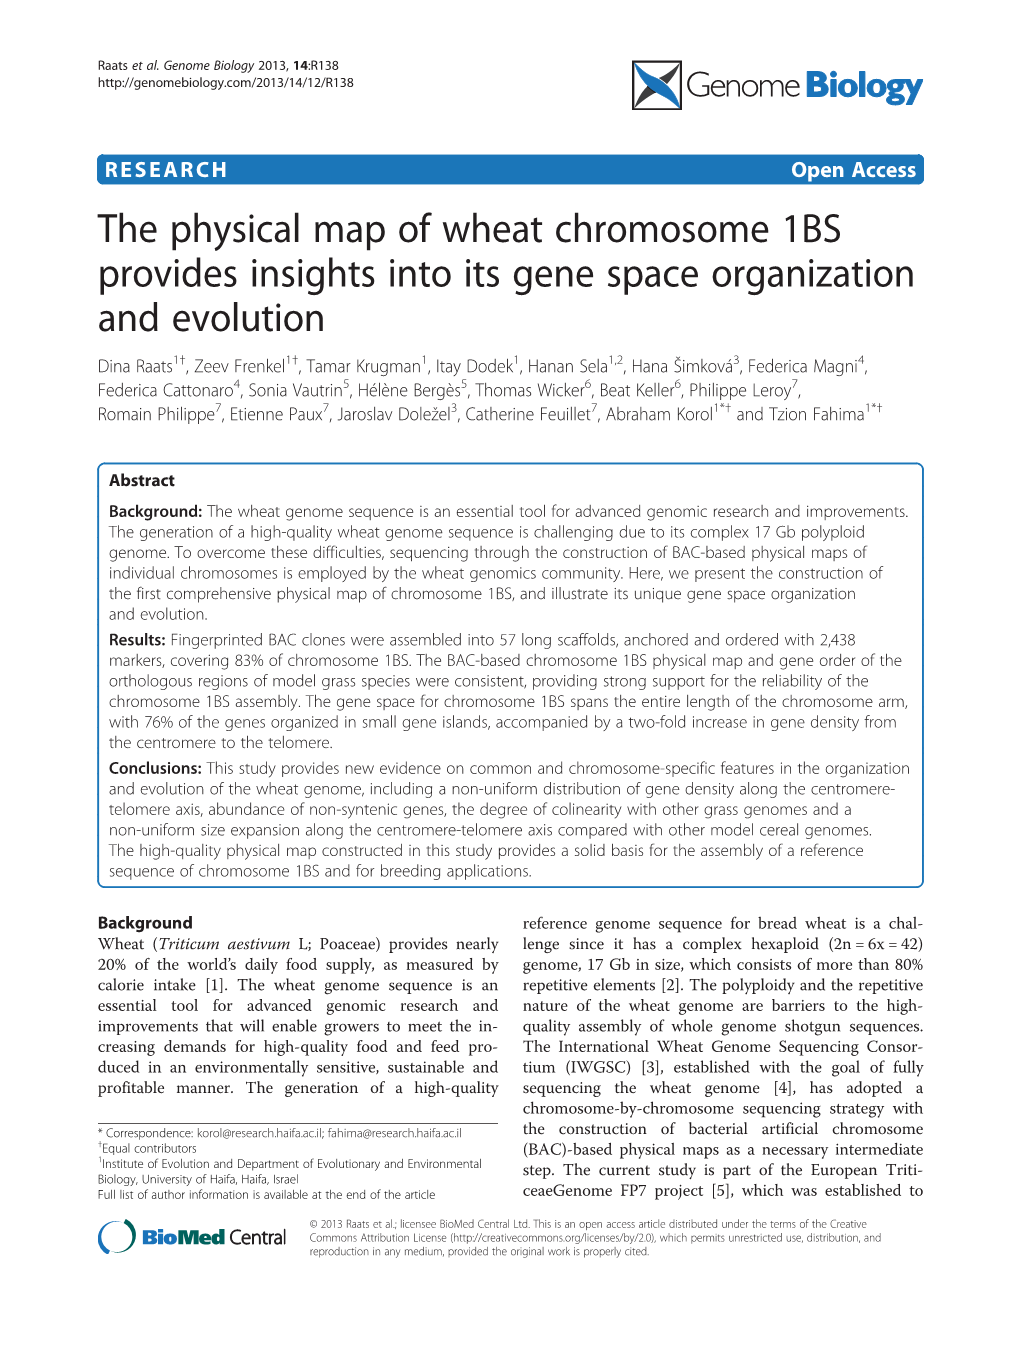 The Physical Map of Wheat Chromosome 1BS Provides Insights Into Its Gene Space Organization and Evolution